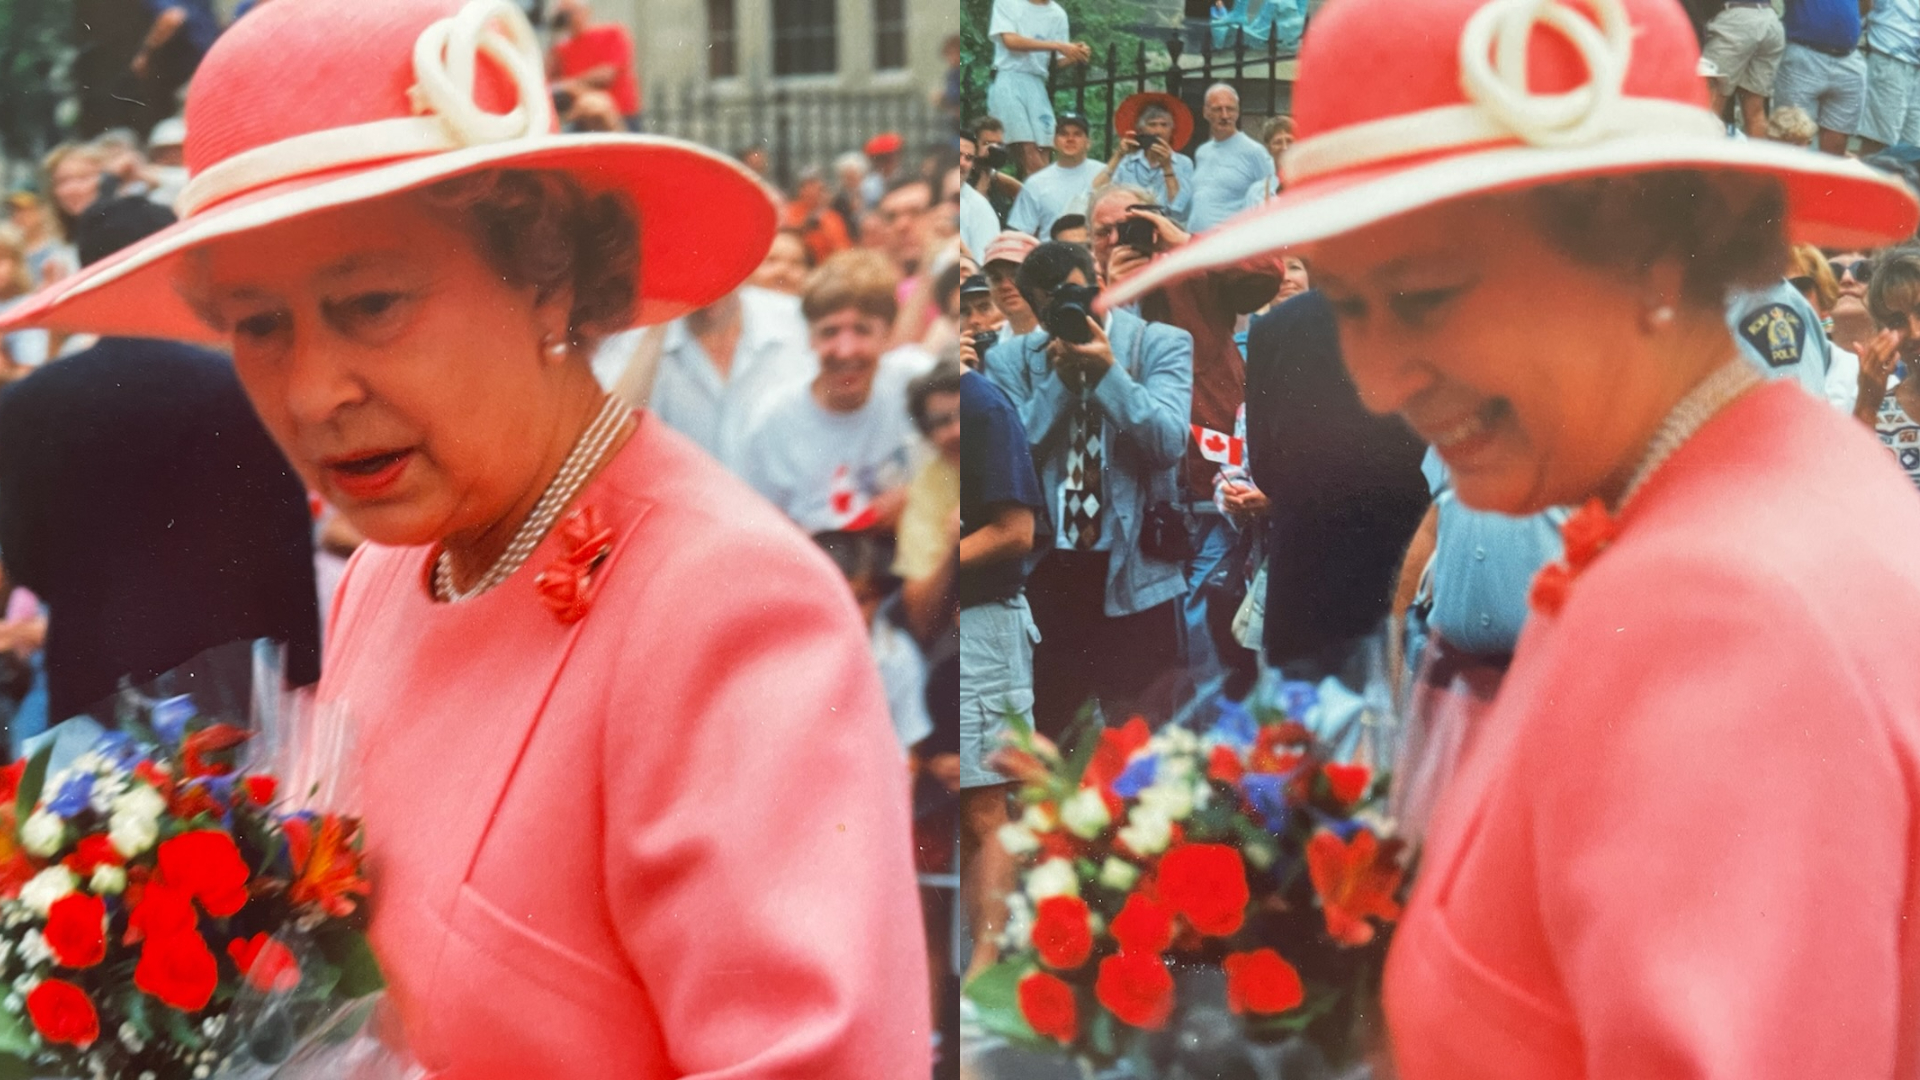 The Queen makes an appearance in Halifax, Canada, in 1994